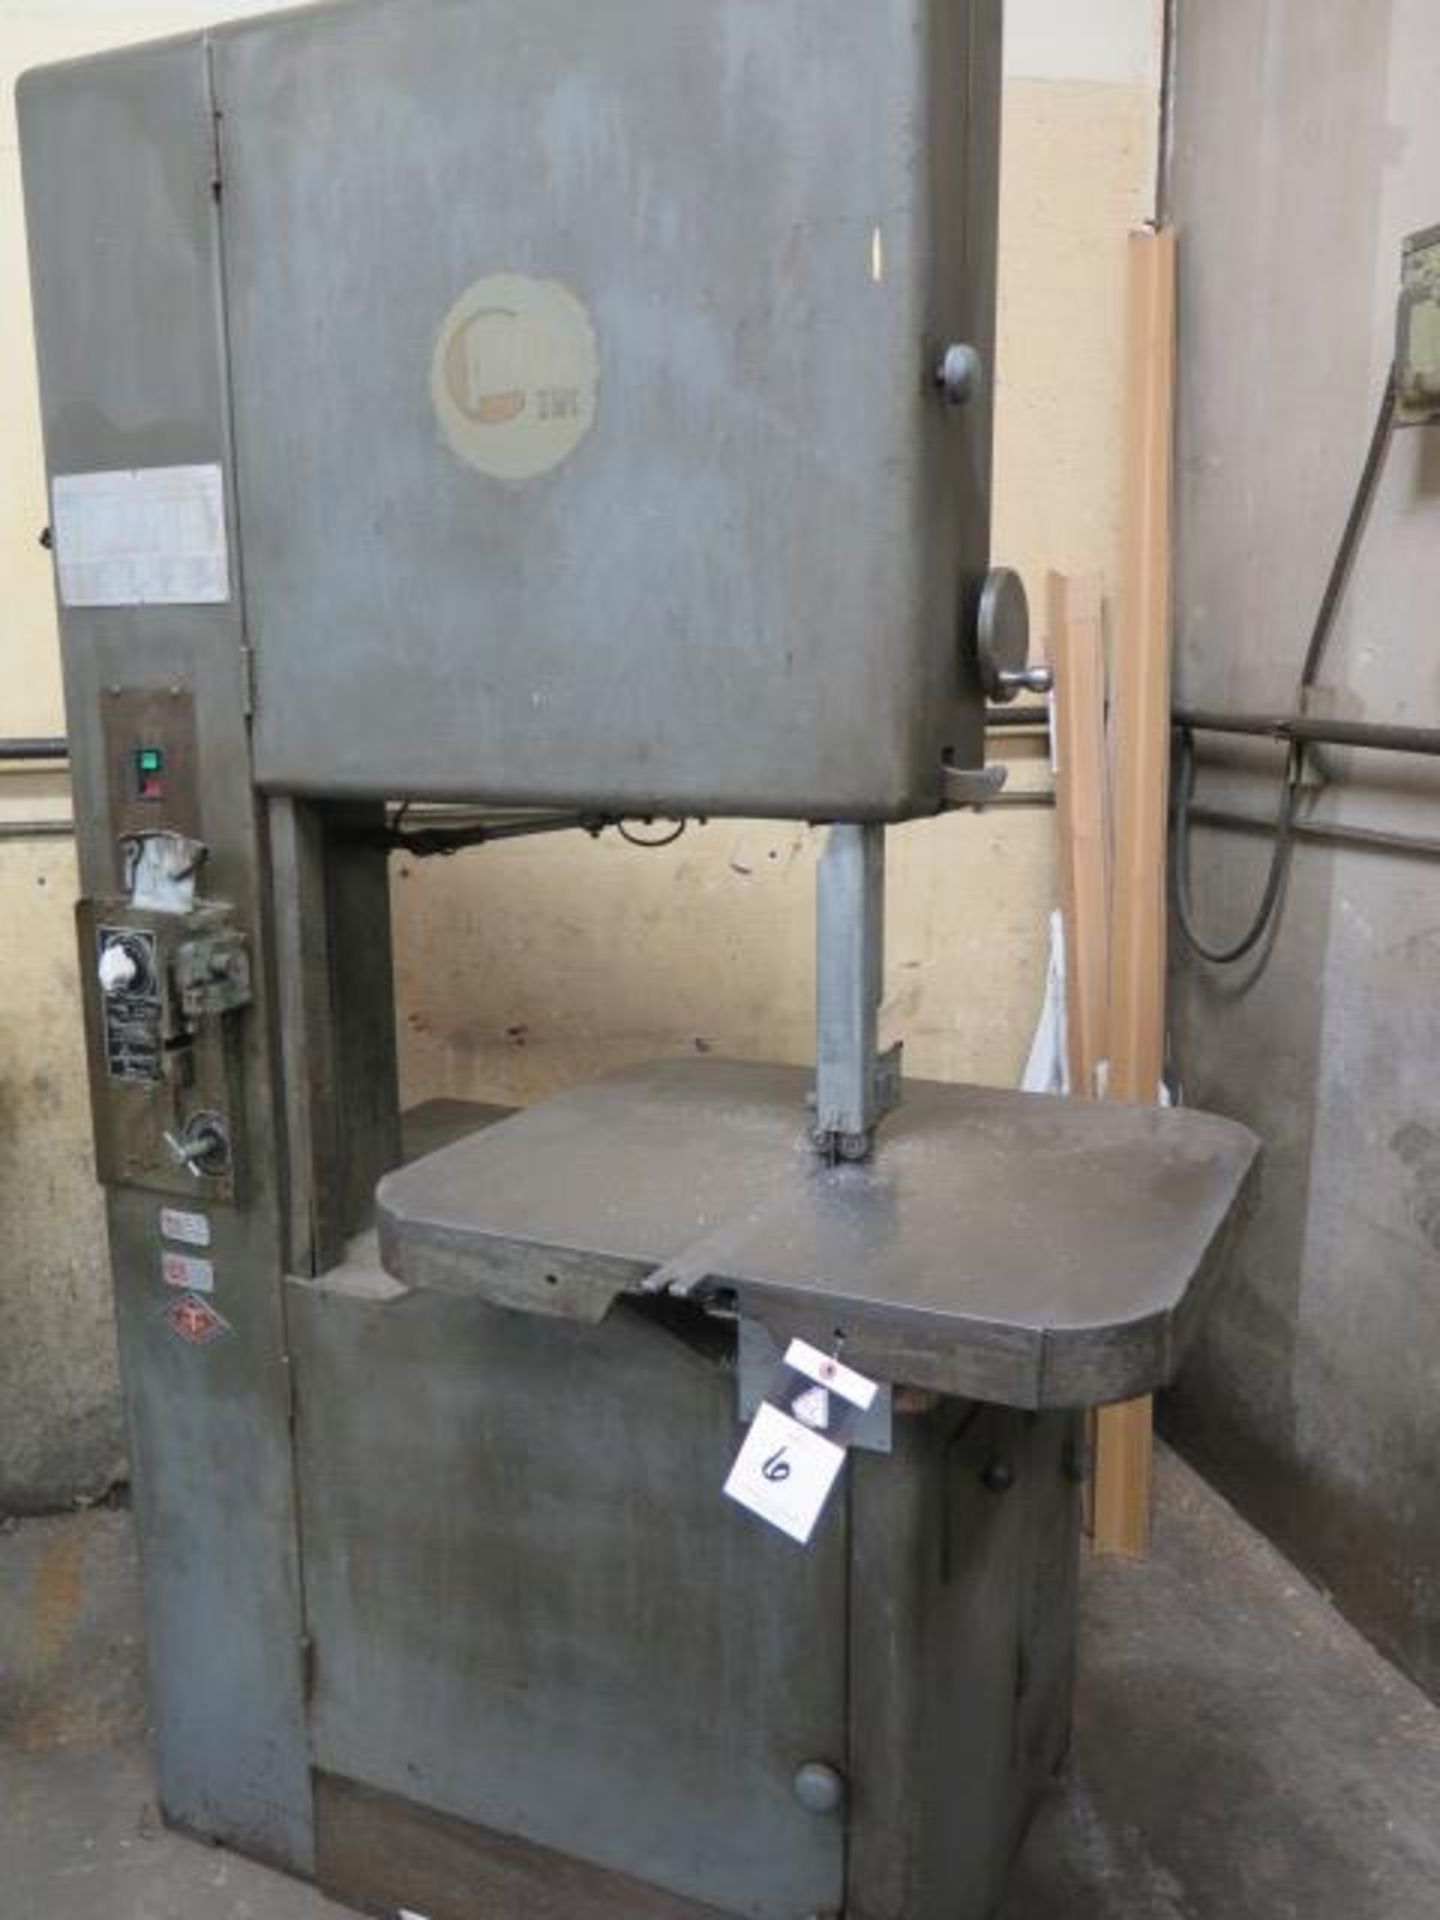 Grob NS24 24” Vertical Band Saw s/n 3570 w/ Blade Welder (SOLD AS-IS - NO WARRANTY) - Image 2 of 5